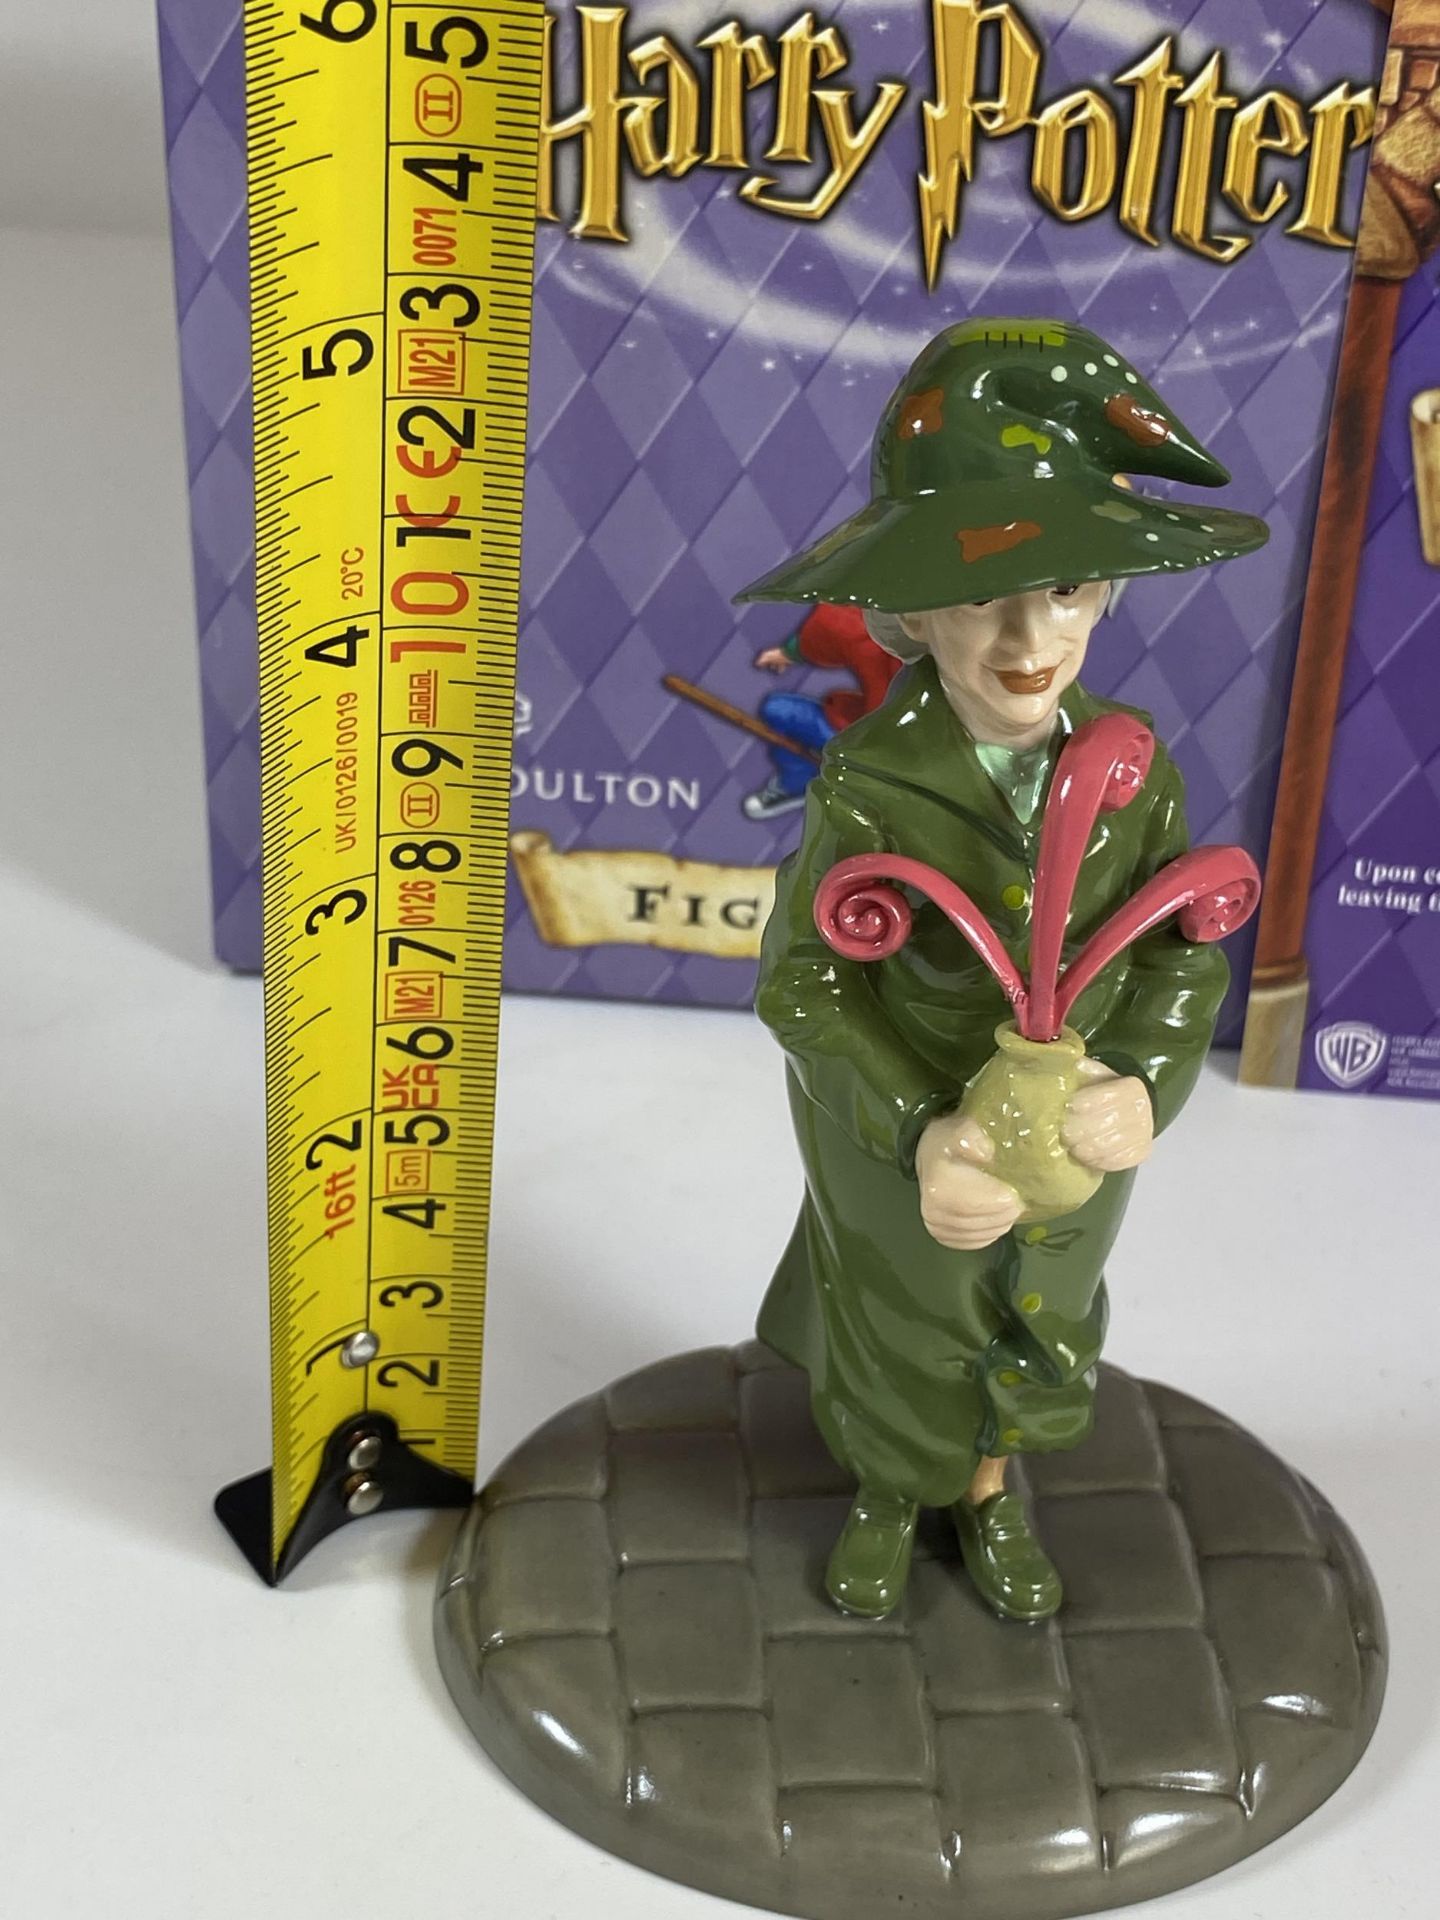 A BOXED ROYAL DOULTON HARRY POTTER PROFESSOR SPROUT HPFIG21 FIGURE WITH CERTIFICATE - Image 5 of 6